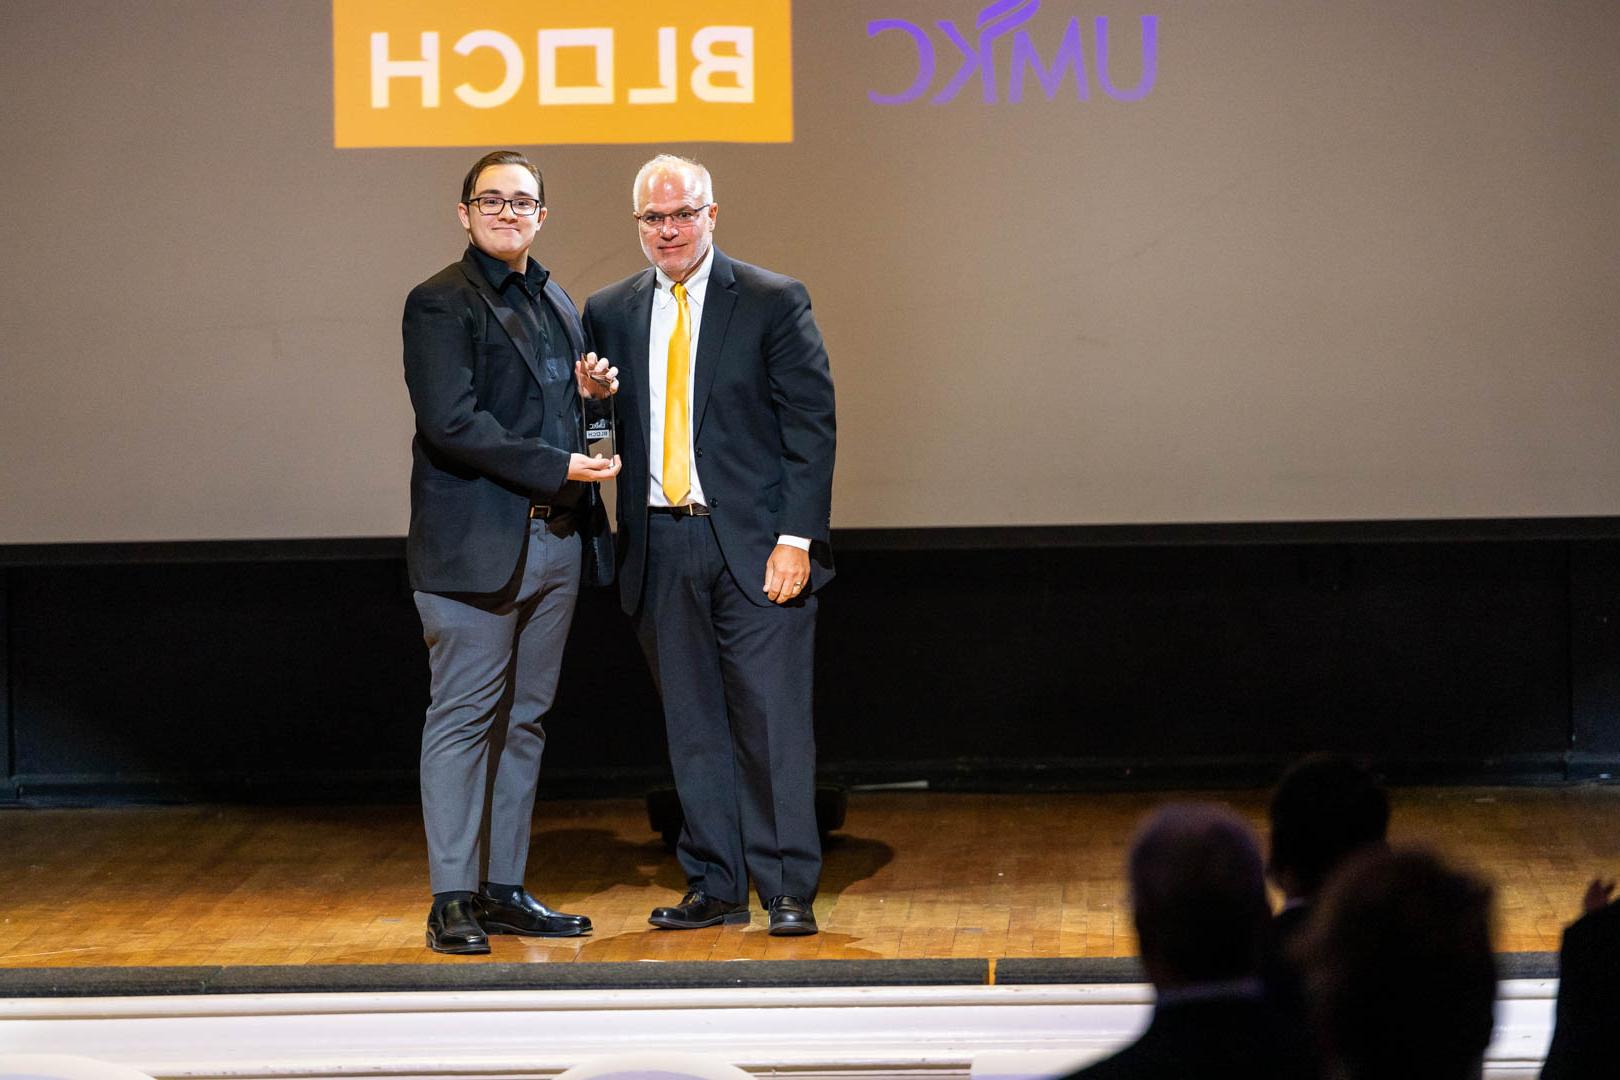 a man presents a student with an award onstage